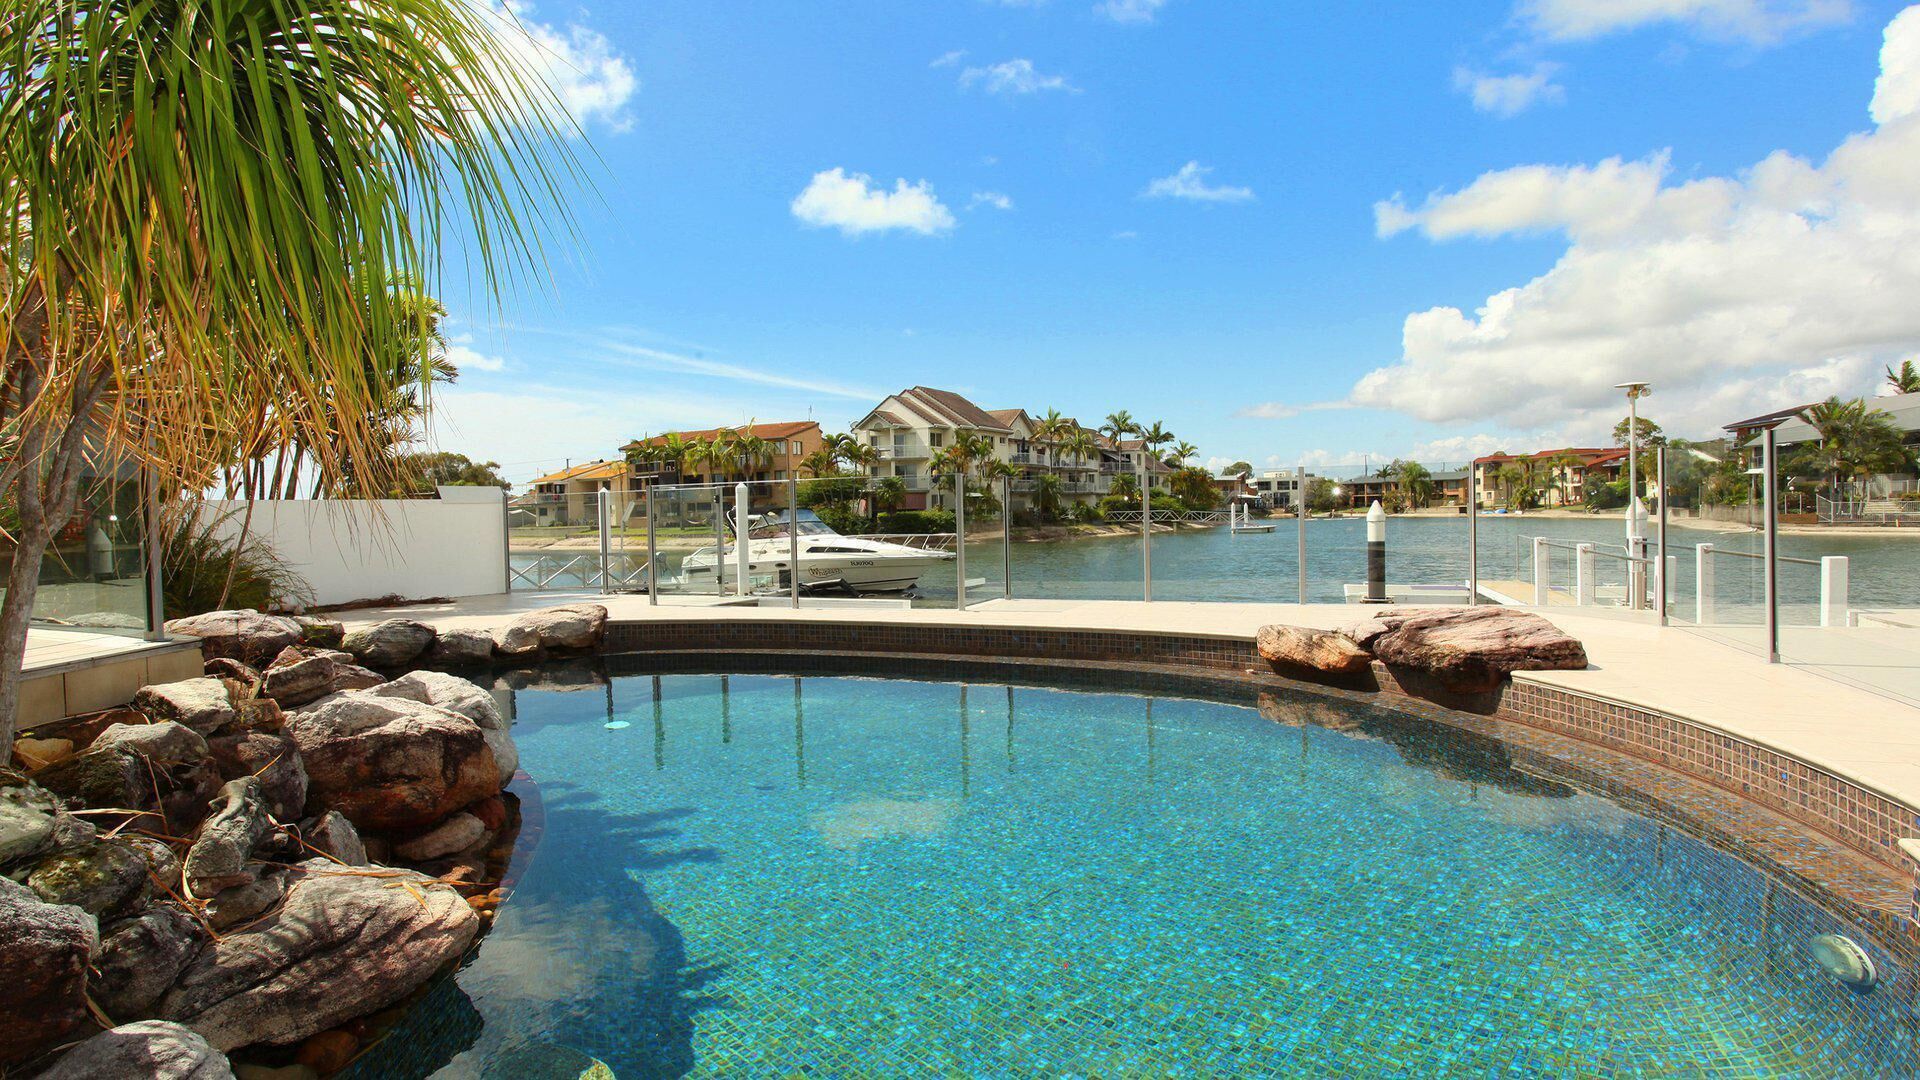 Yulunga 20 - 4 Bedroom House w/ Pool+ Wifi+ Aircon with a private pontoon in Mooloolaba